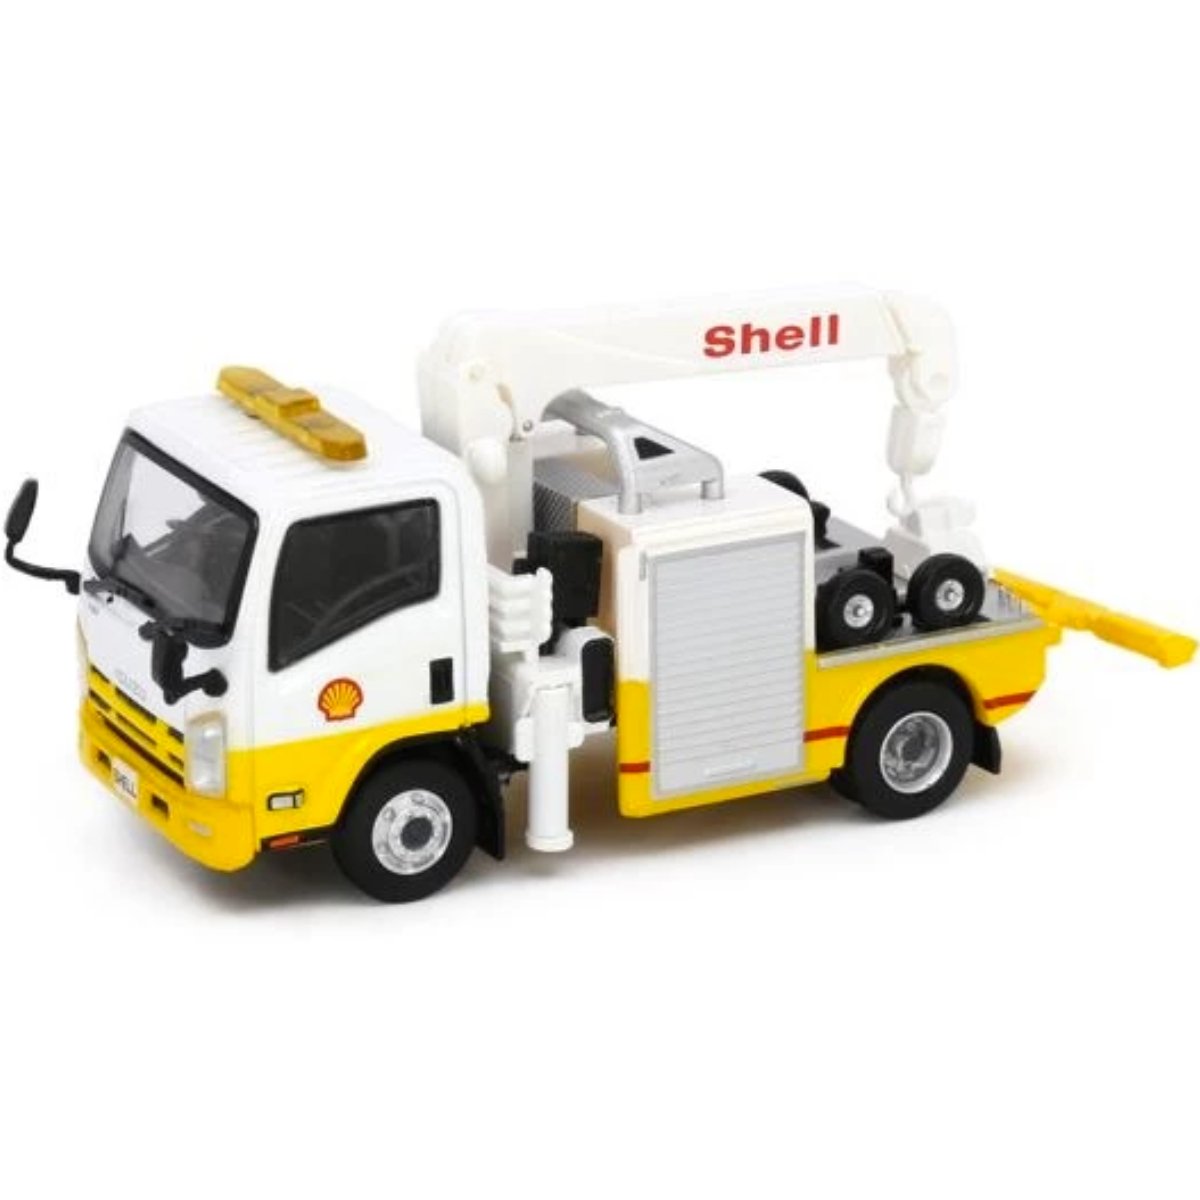 Tiny Models Isuzu N Series Shell Tow Truck (1:64 Scale) - Phillips Hobbies